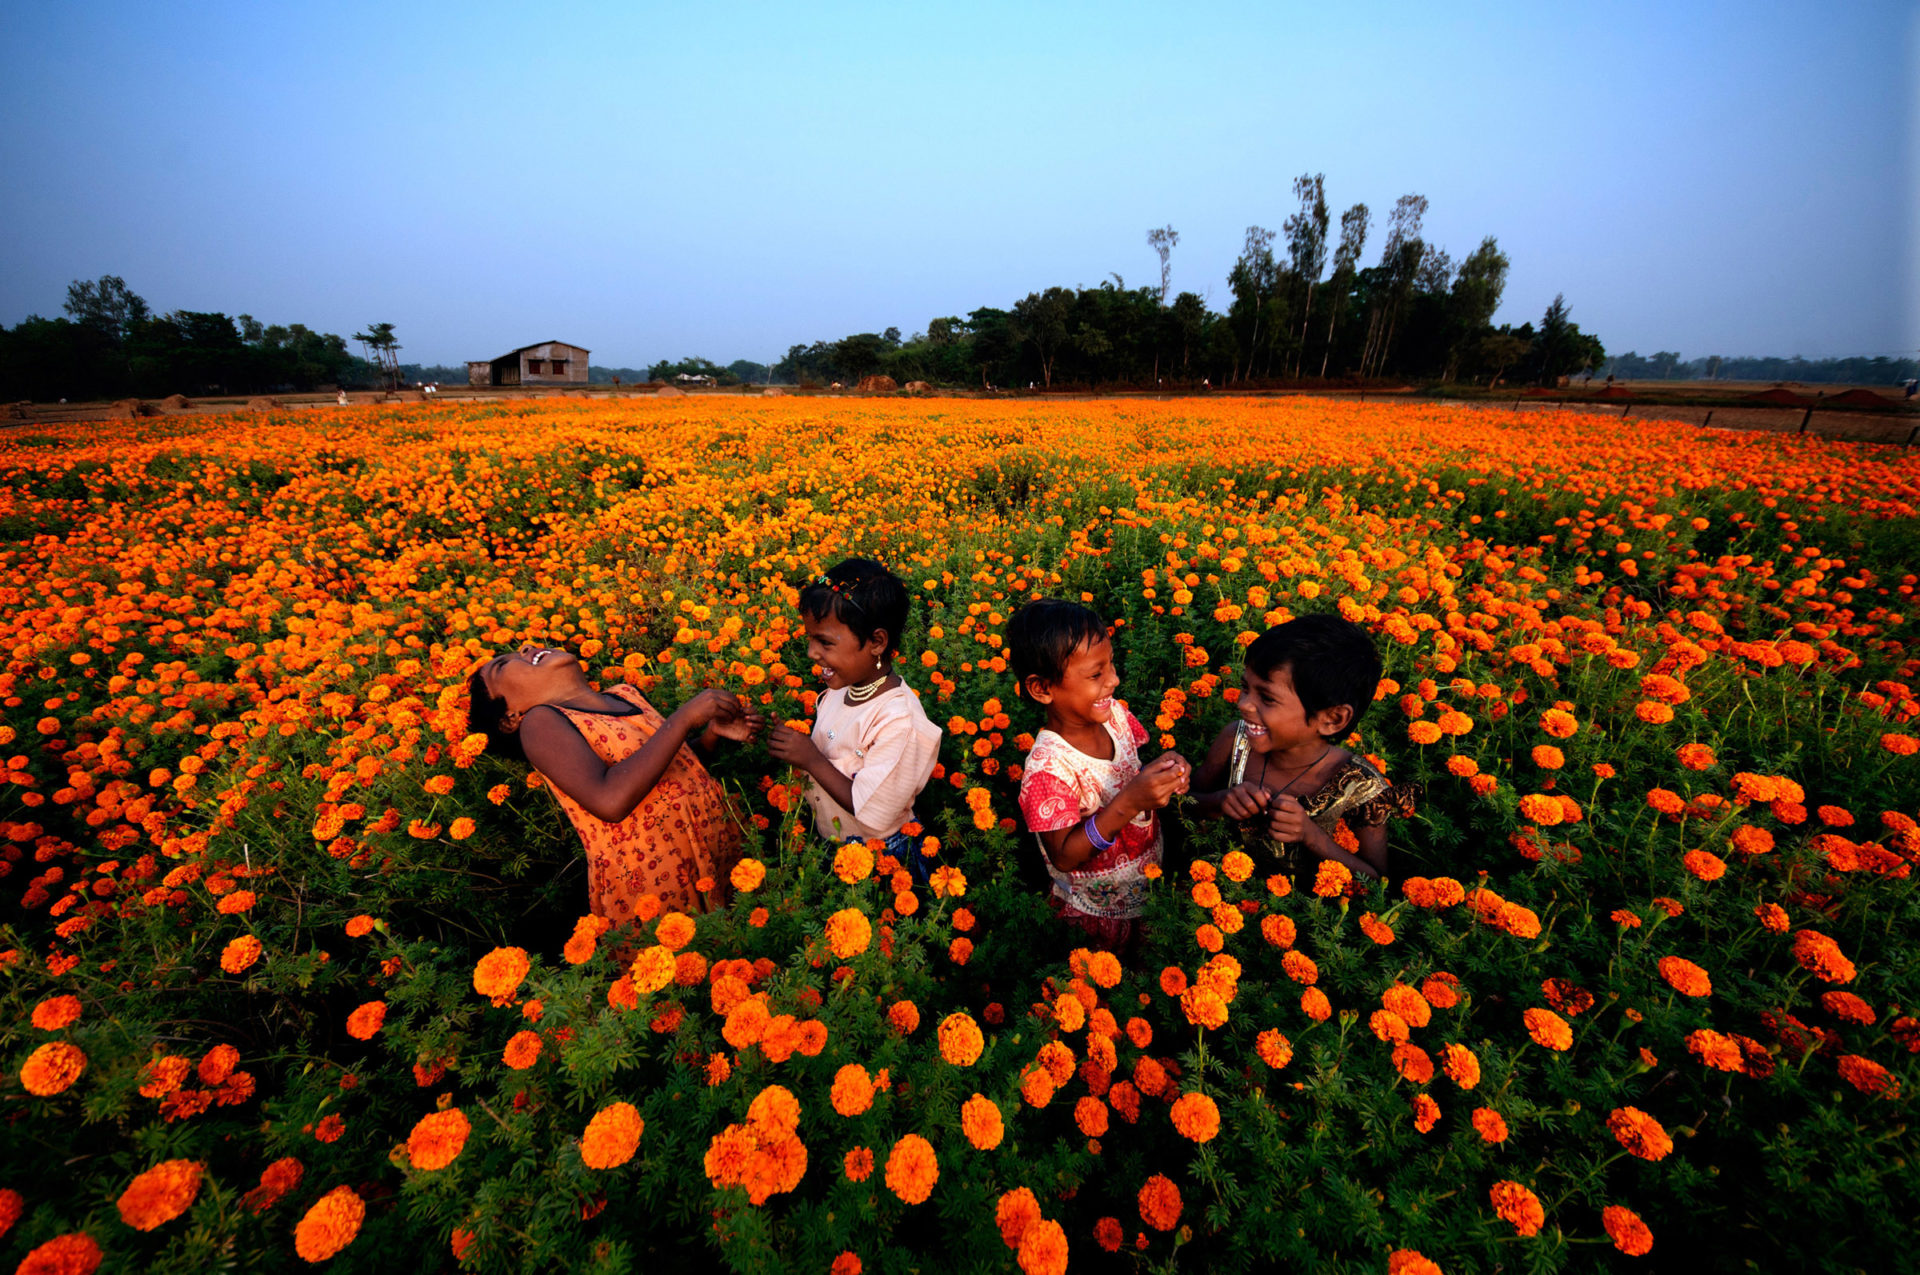 Four children play and laugh in field of golden yellow flowers.